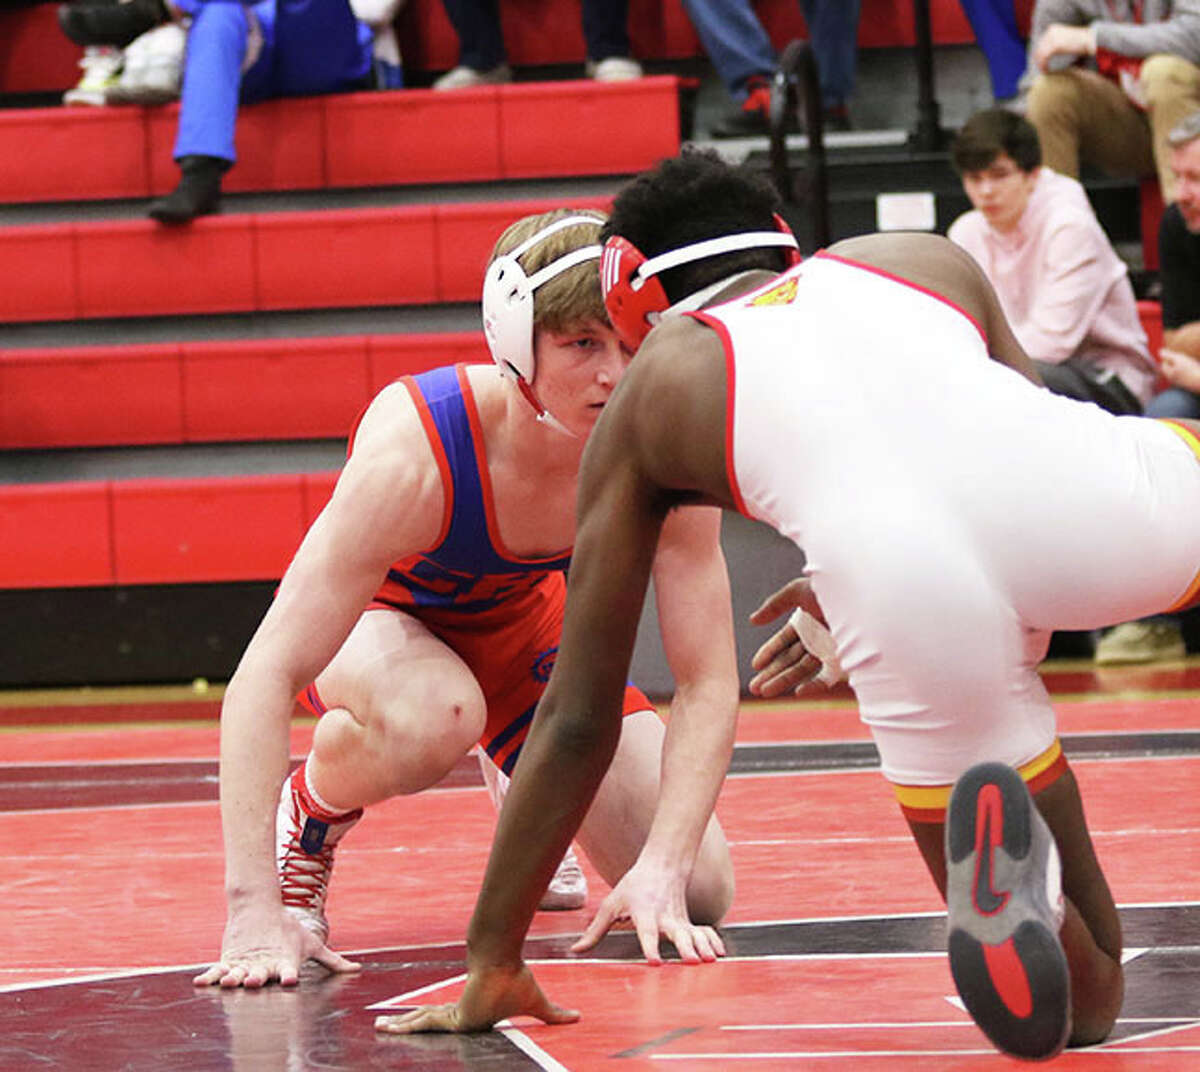 Carlinville's Jake Schwartz (left) will face Max Astacio of Marian Central Catholic in the prelims of the IHSA Class 1A State Wrestling Tourney Thursday in Champaign.